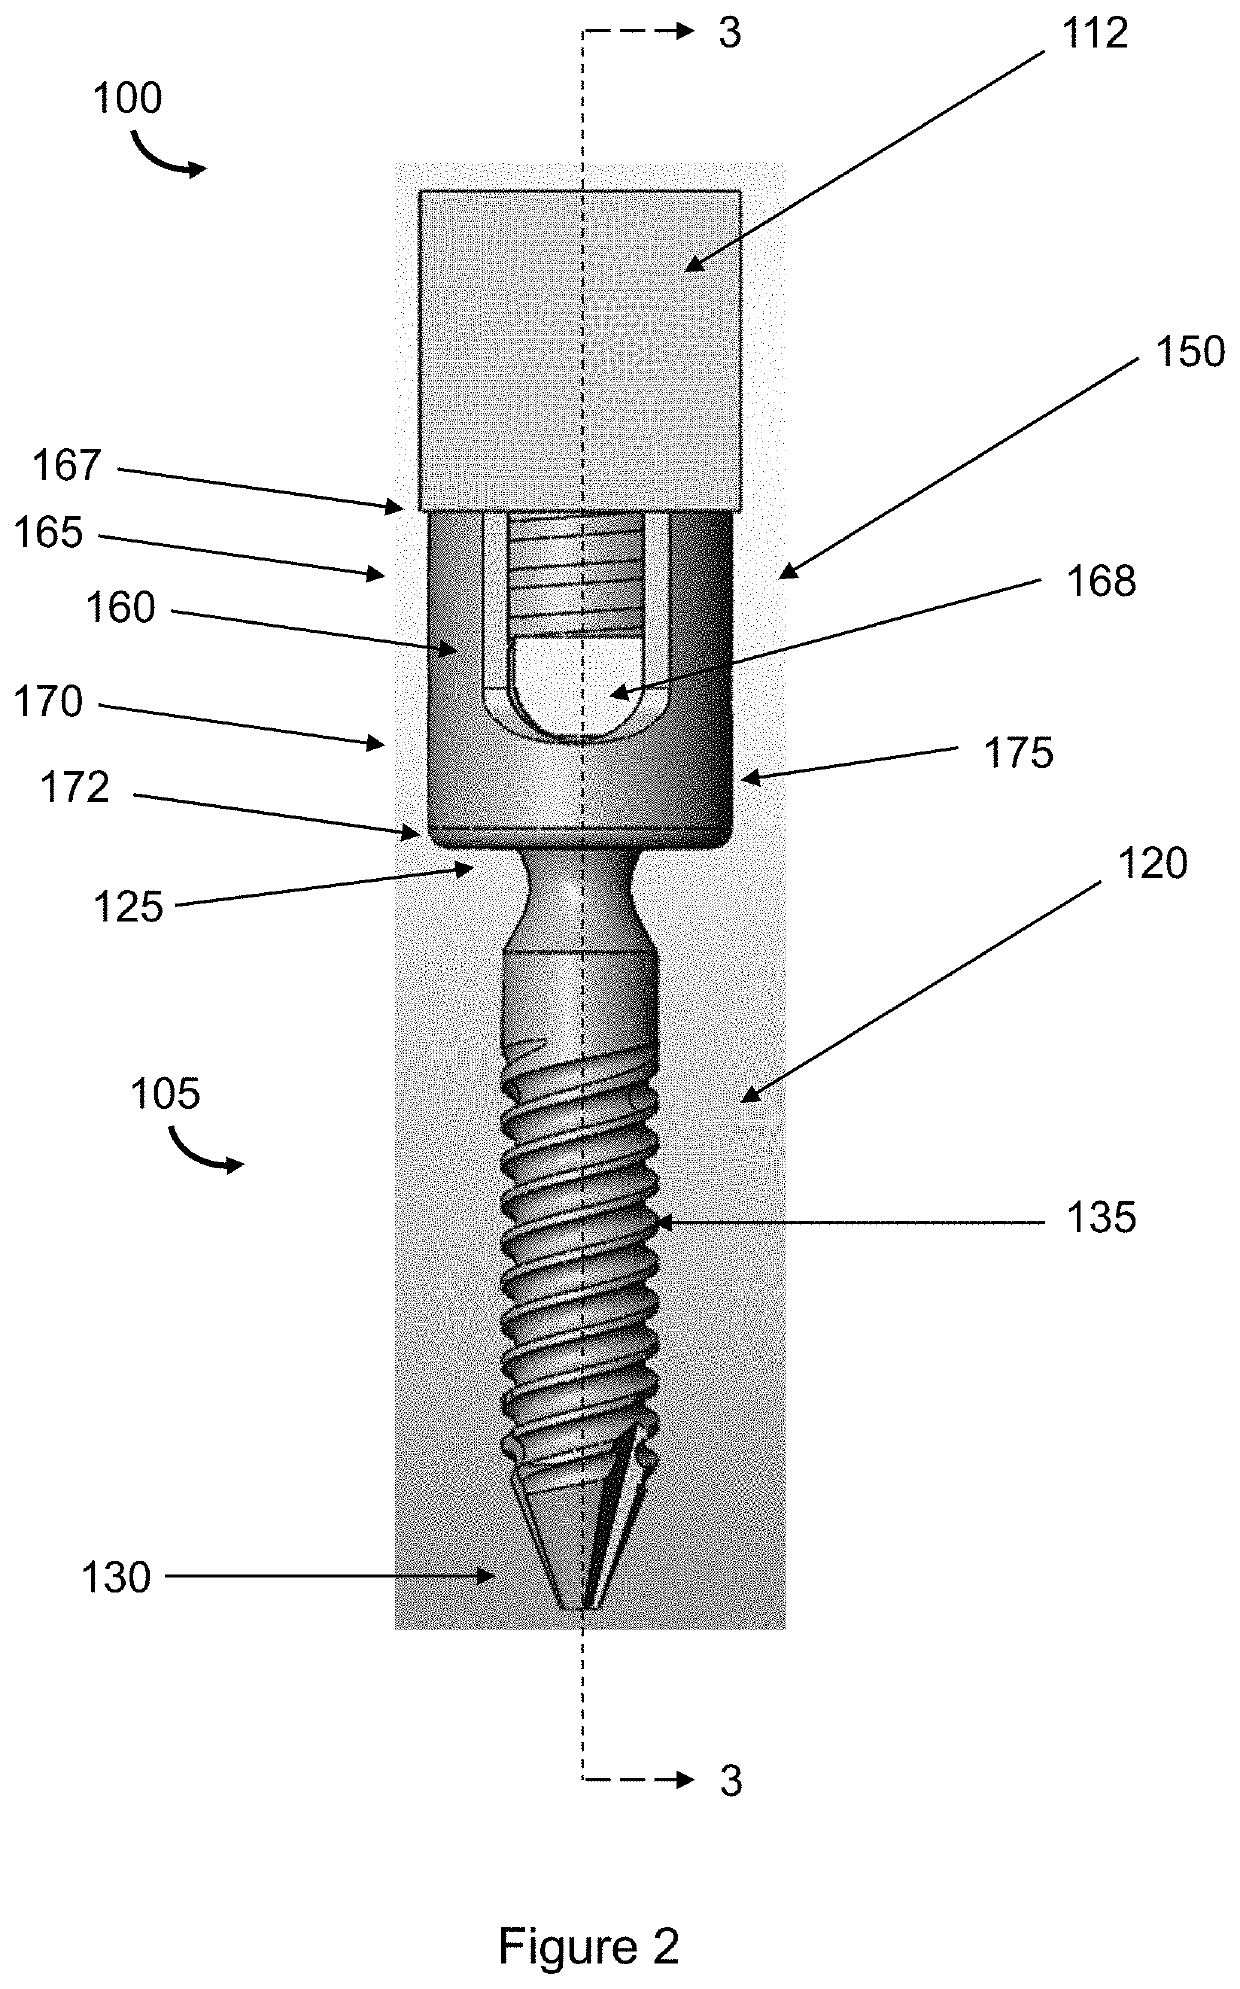 Device for Realignment, Stabilization, and Prevention of Progression of Abnormal Spine Curvature